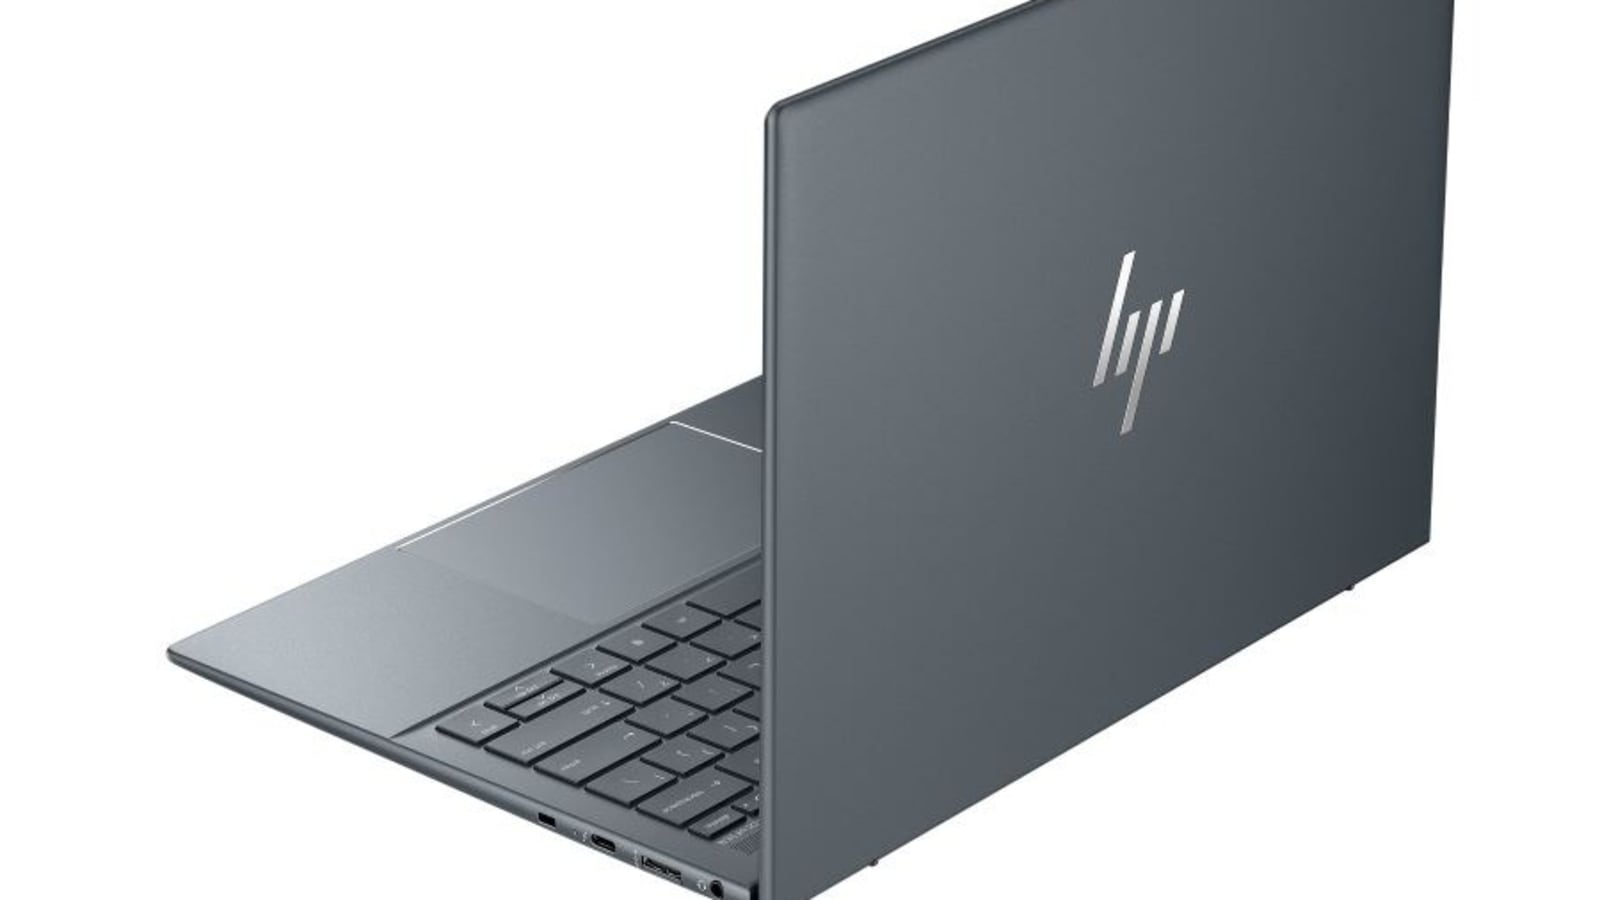 HP introduces the new Dragonfly laptops at a starting price of Rs. 220,000